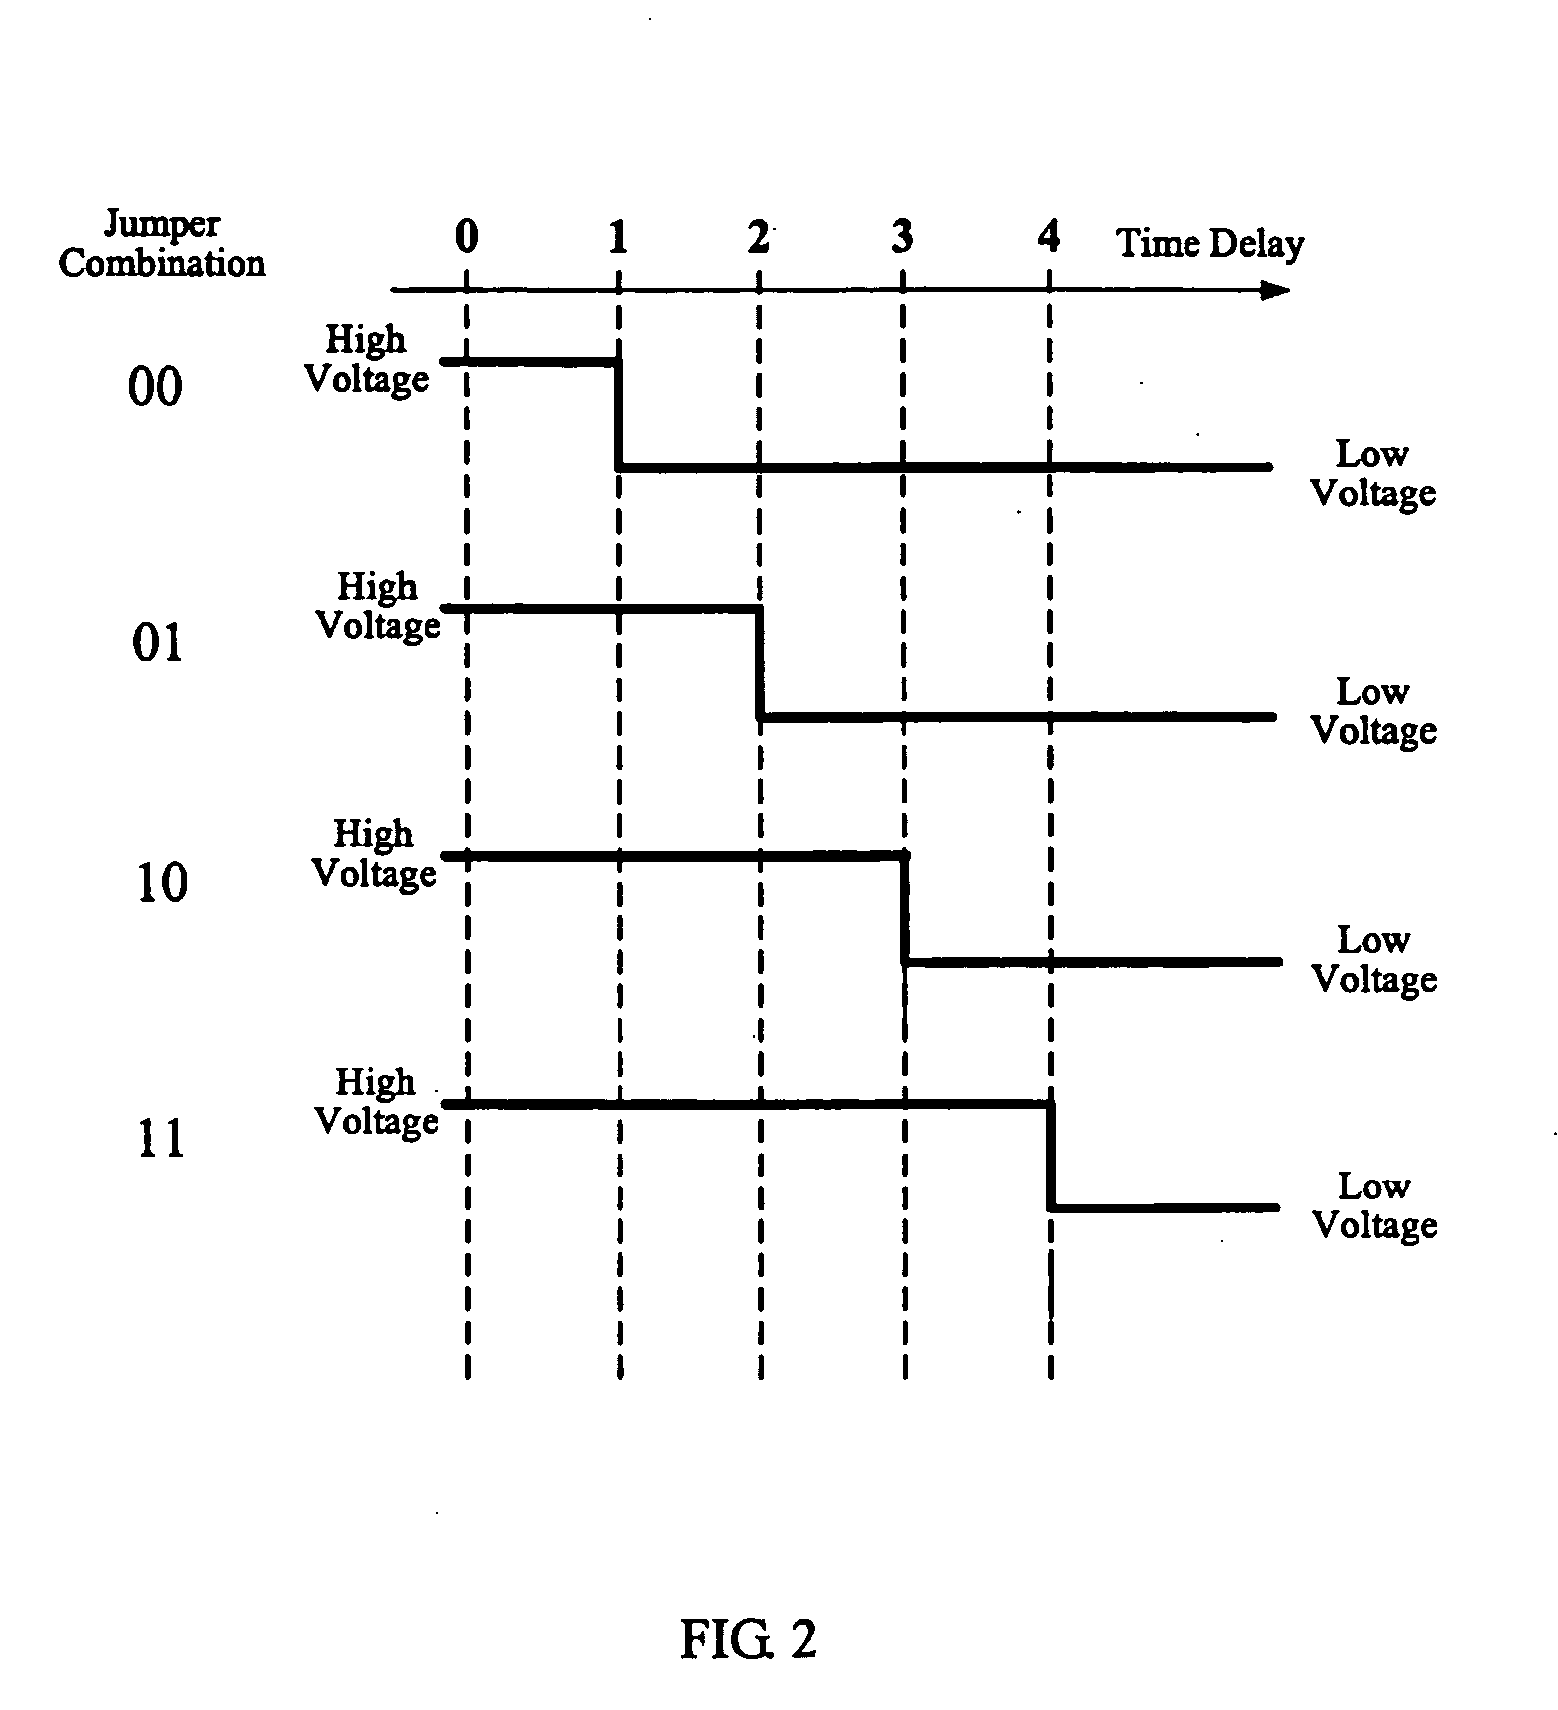 System and method for starting up plural electronic devices in an orderly manner